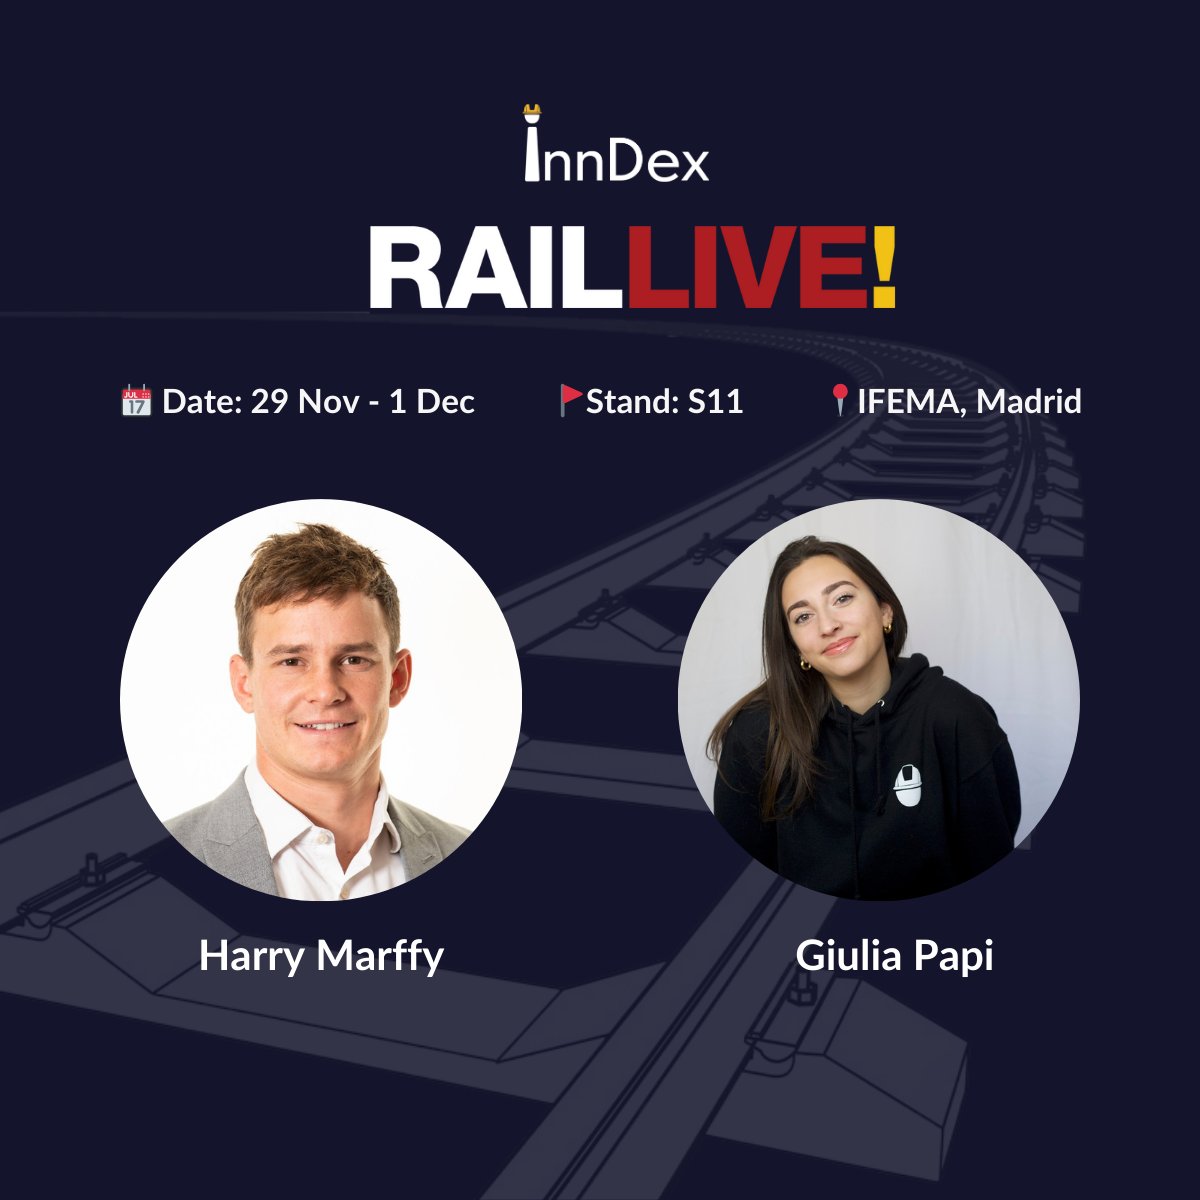 Get ready as we're gearing up for @RailLiveSpain next week. See you all in Madrid 🇪🇸 #RailLiveMadrid #Construction #rail